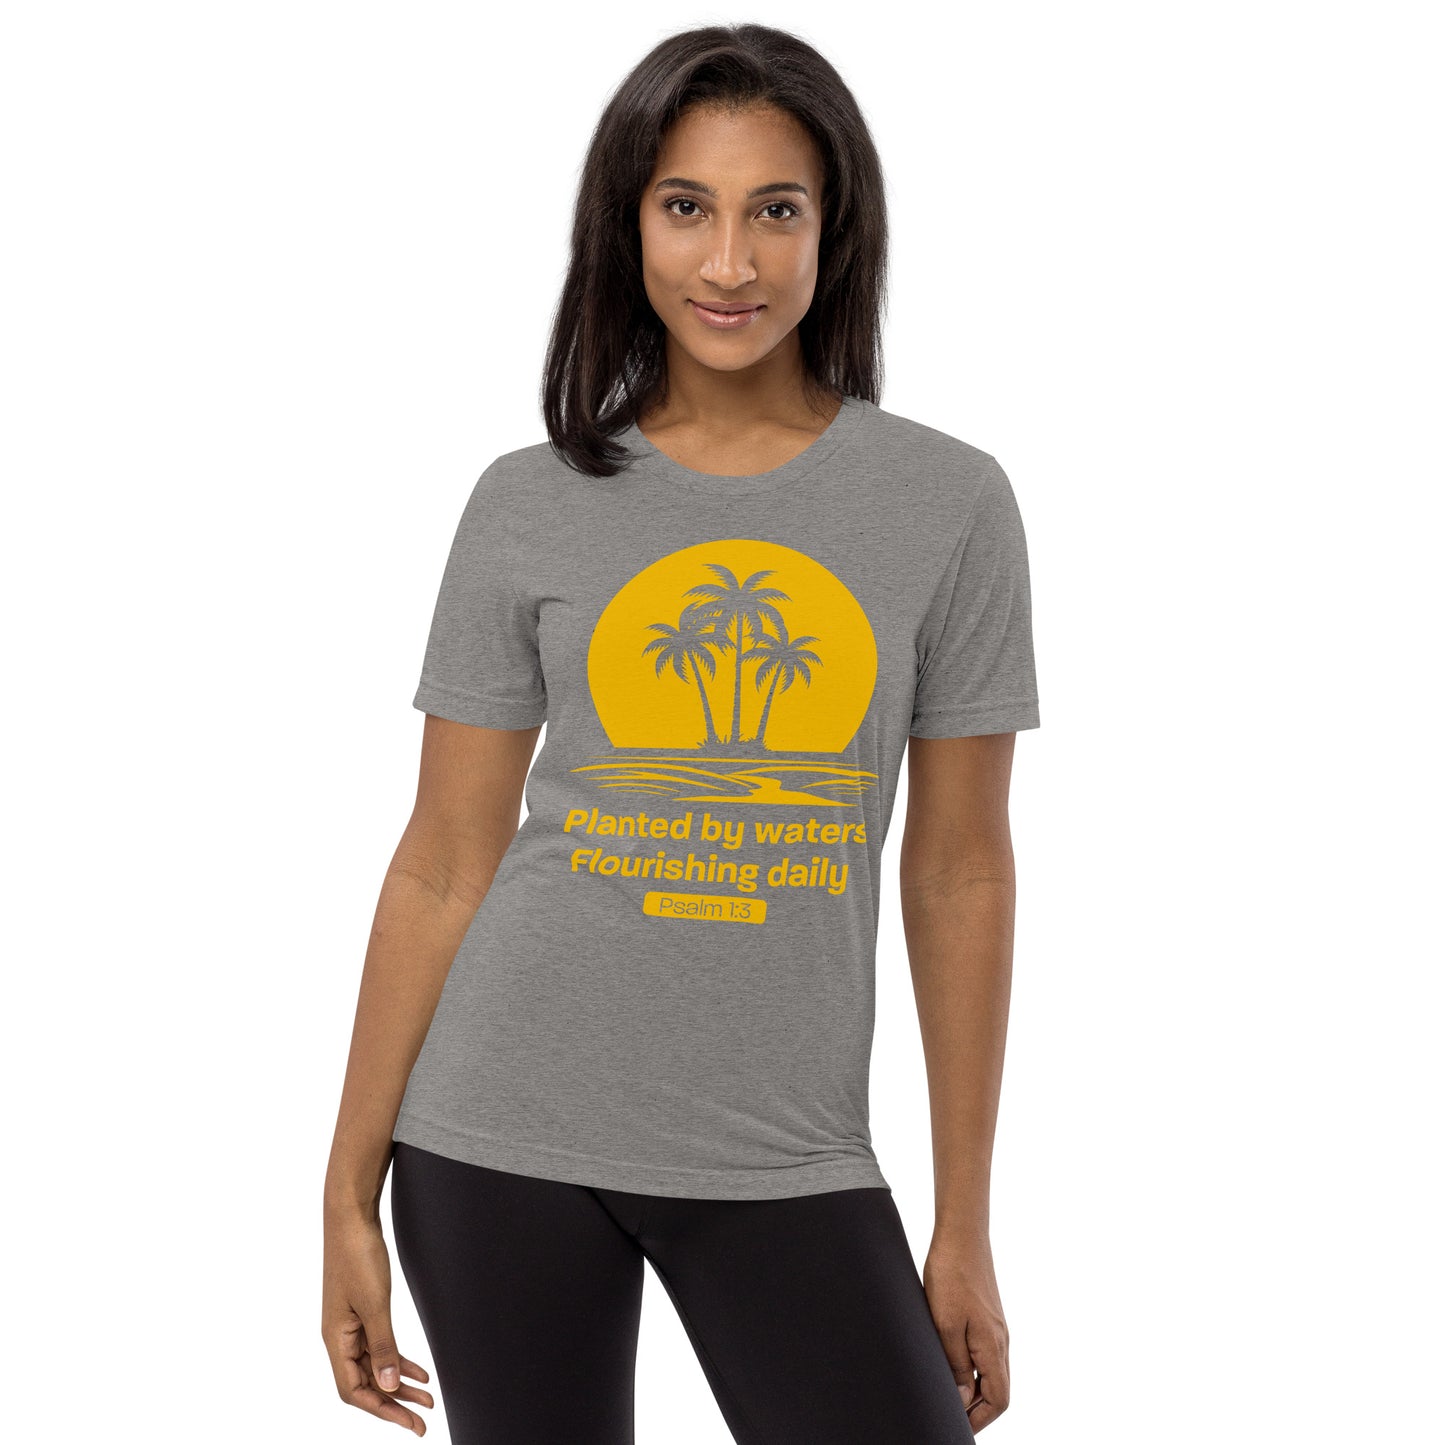 Planted by Waters, Flourishing Daily Ps 1:3 - Vintage Tri-Blend Short Sleeve T-Shirt